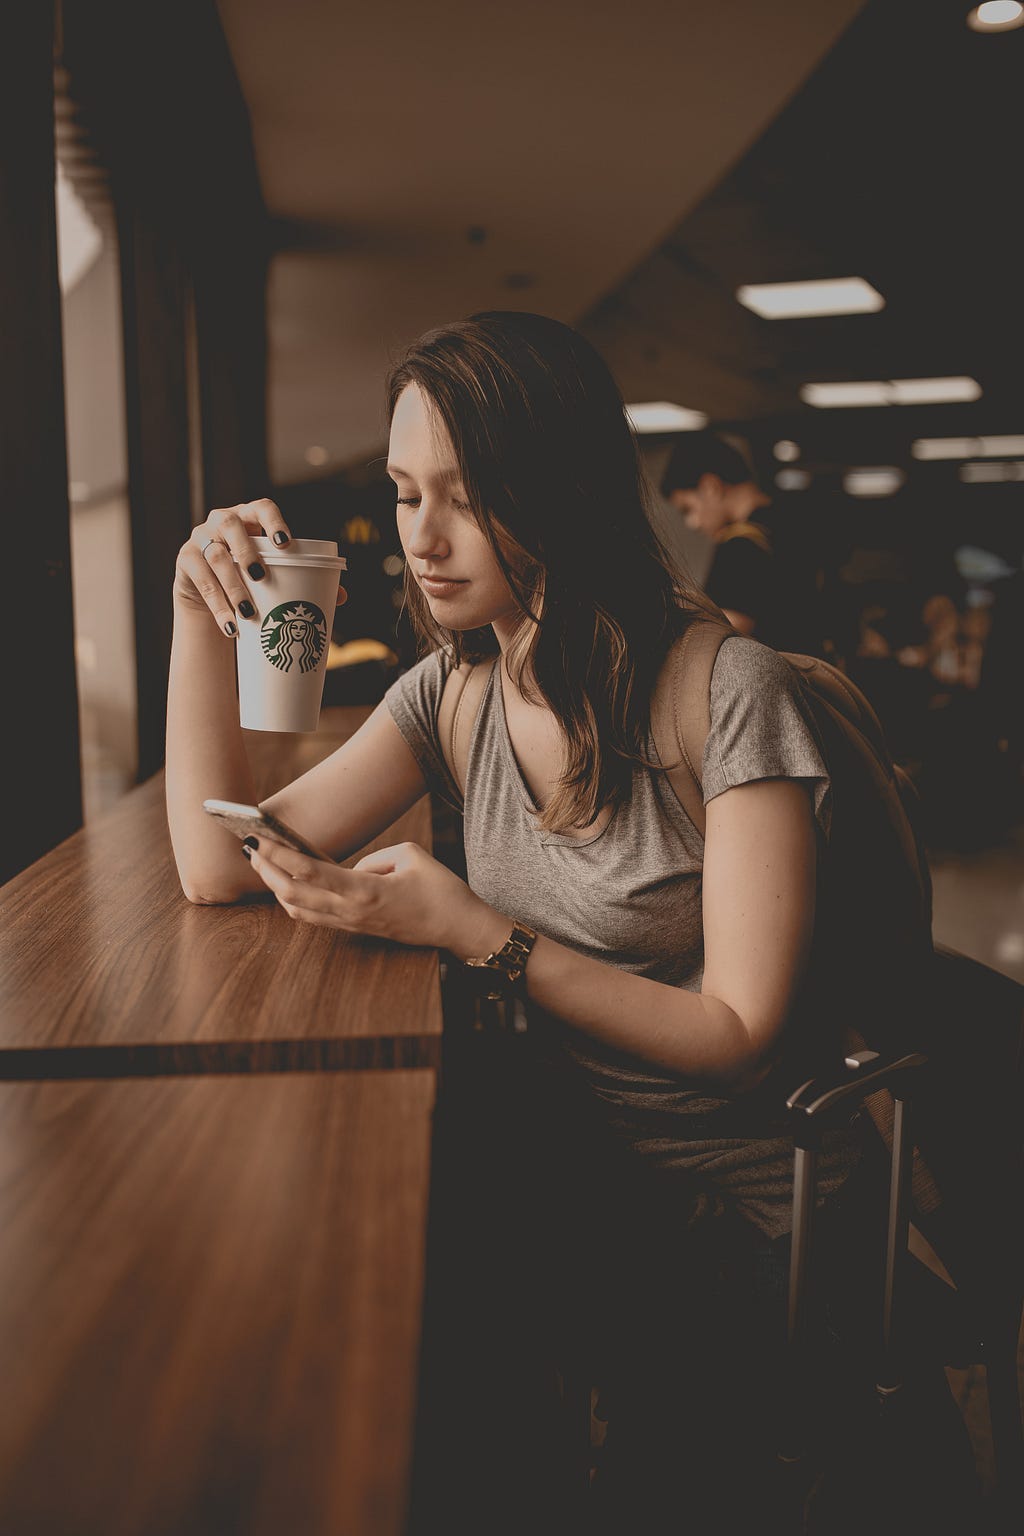 A woman drinking Starbucks and checking her text messages on iPhone